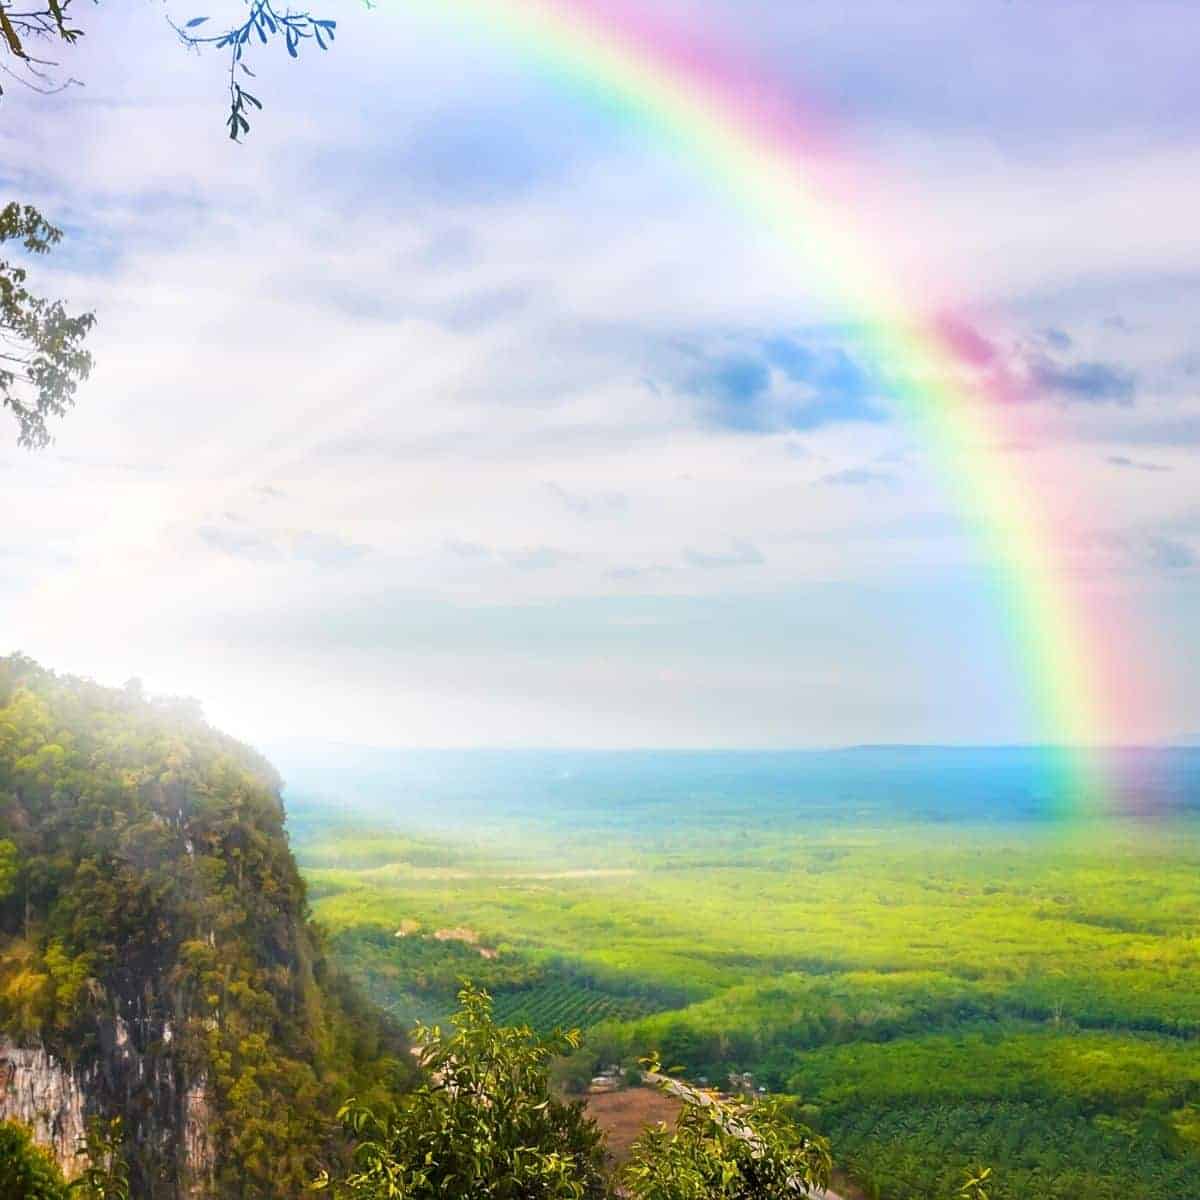 View of a rainbow over trees from a hilltop.